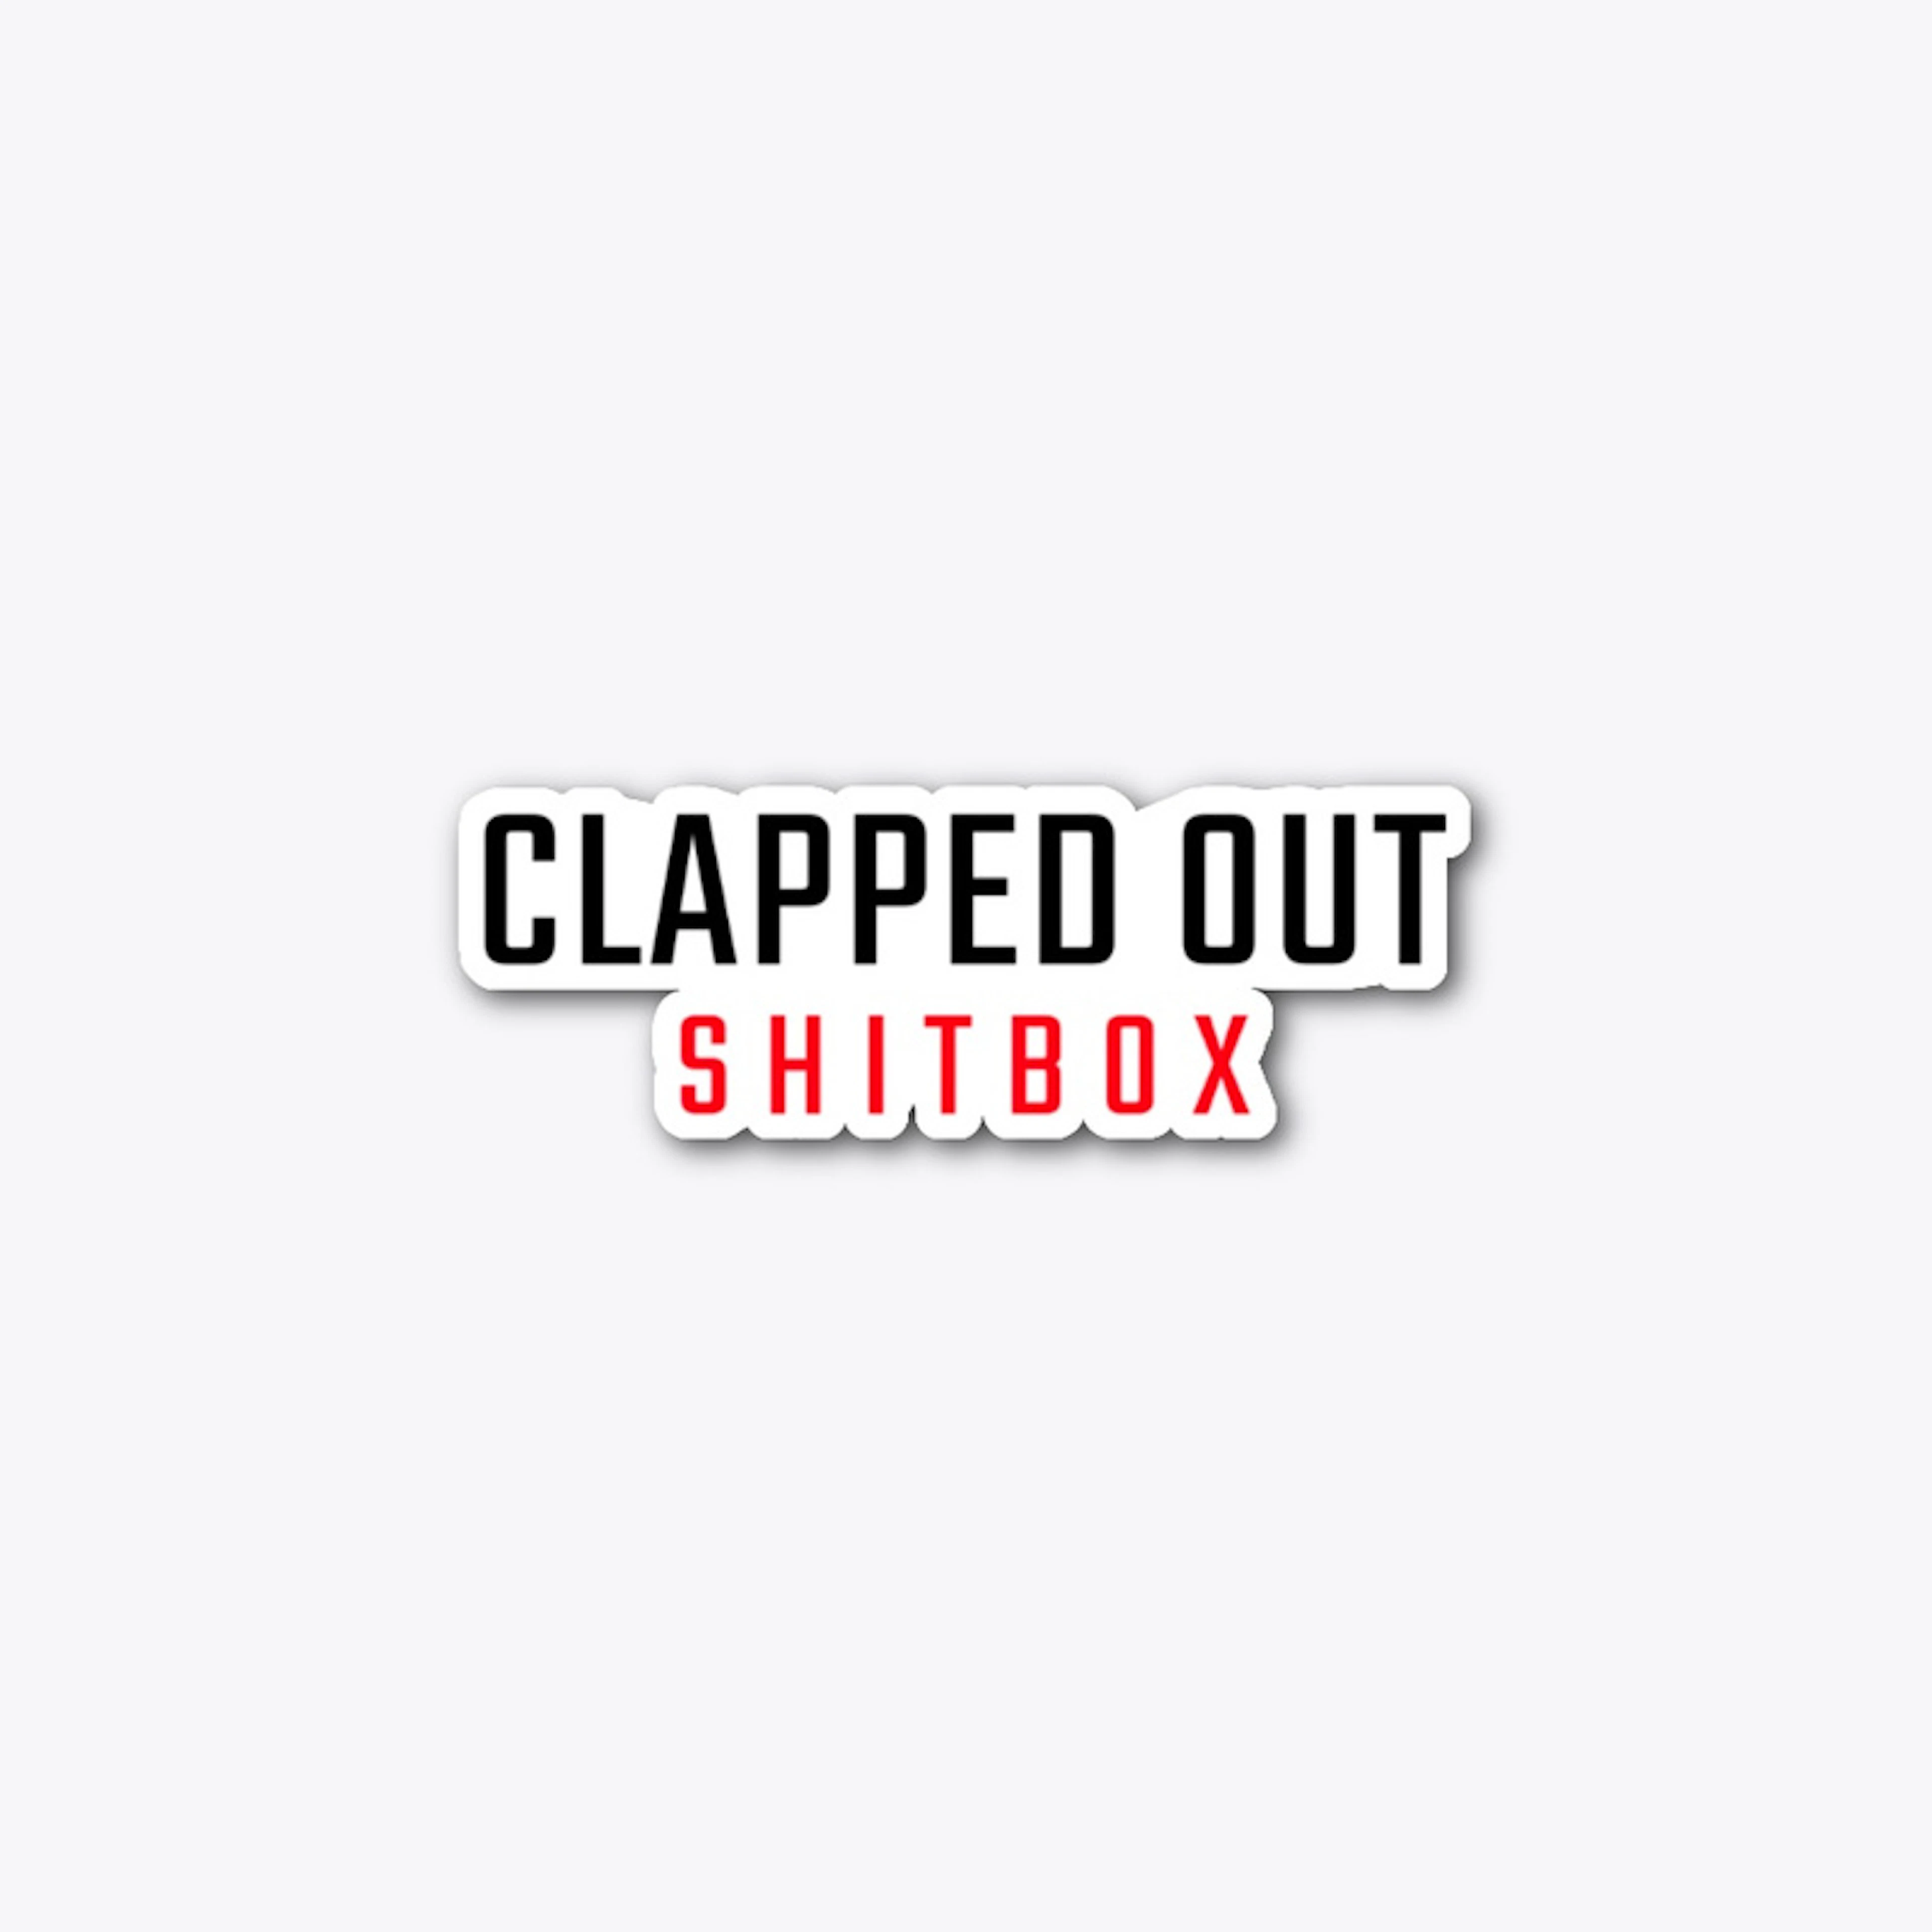 GET CLAPPED